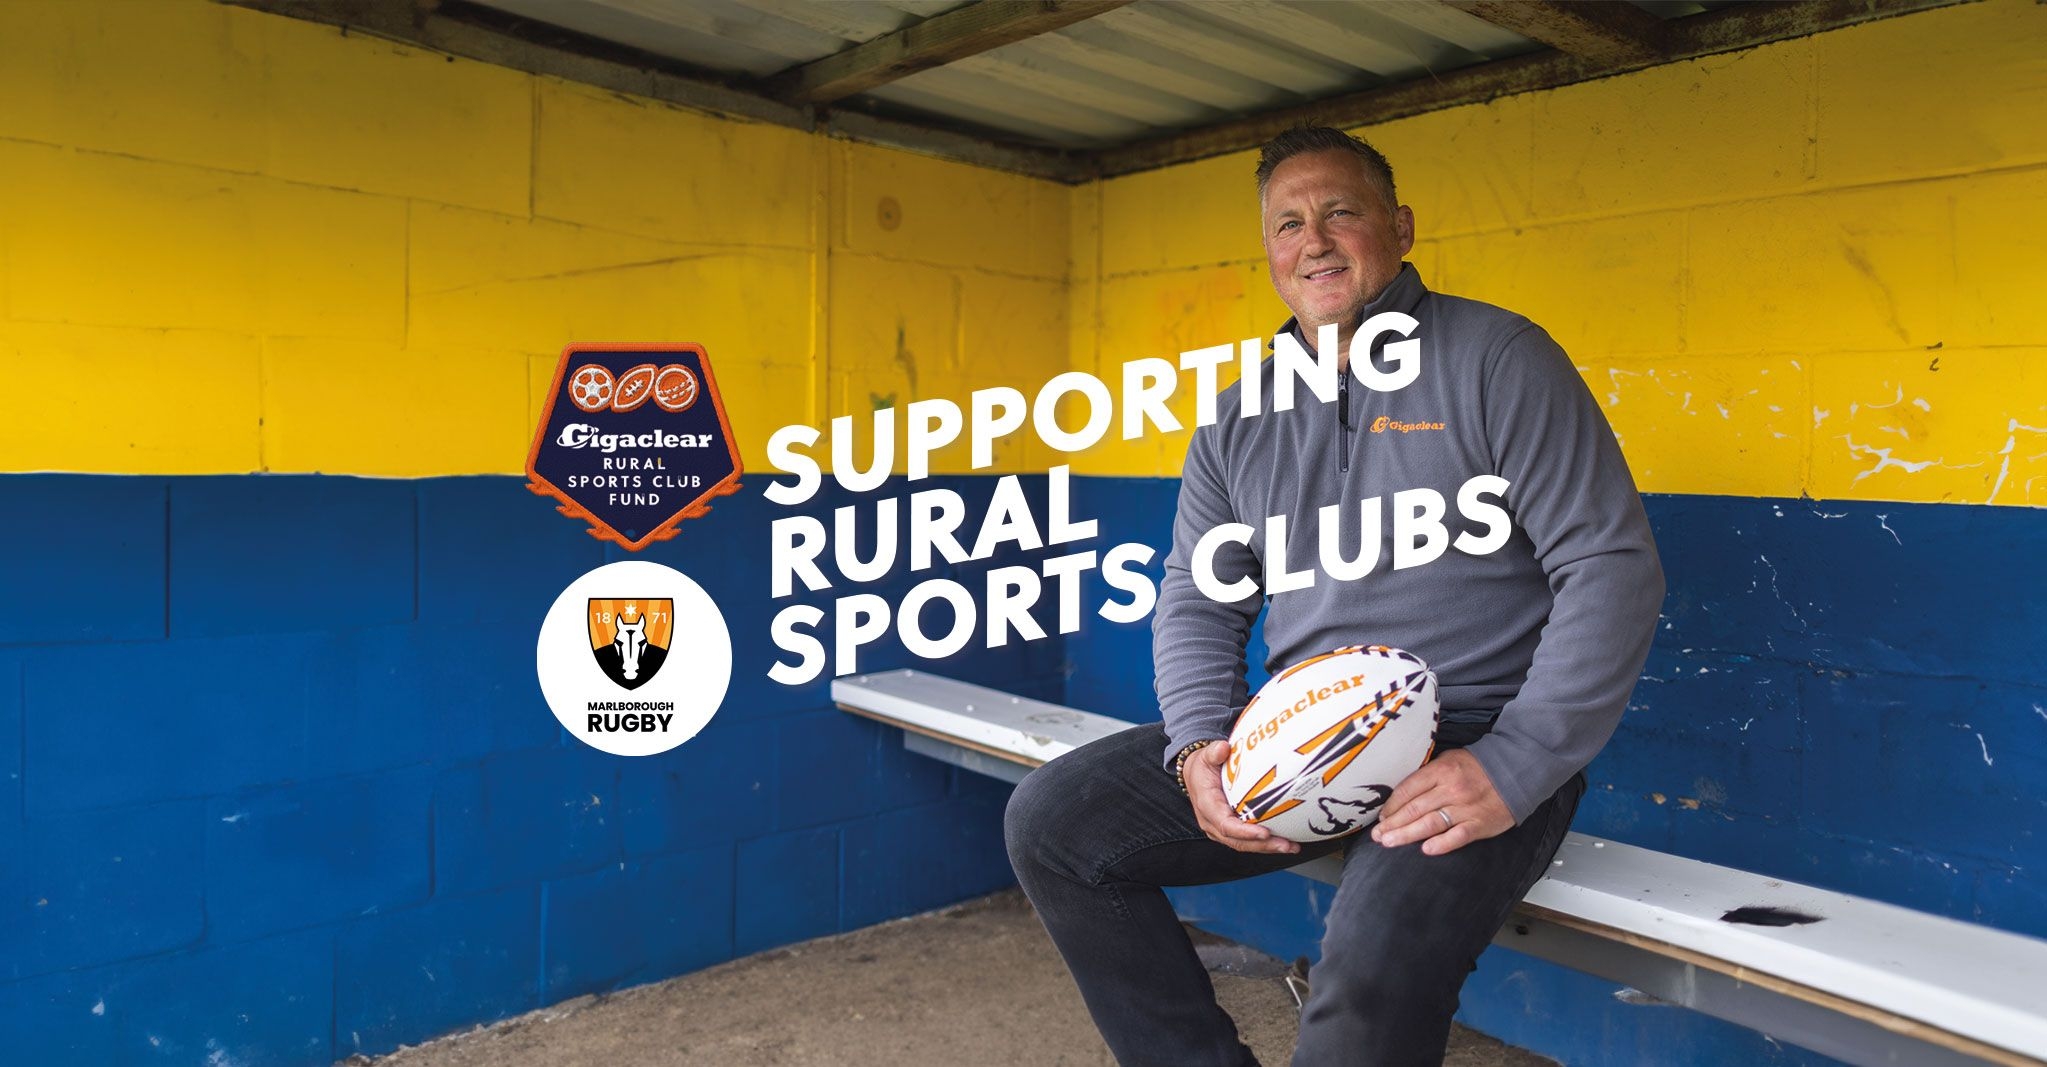 Marlbourough Rugby Club are partnered with the Gigaclear Rural Sports Club fund